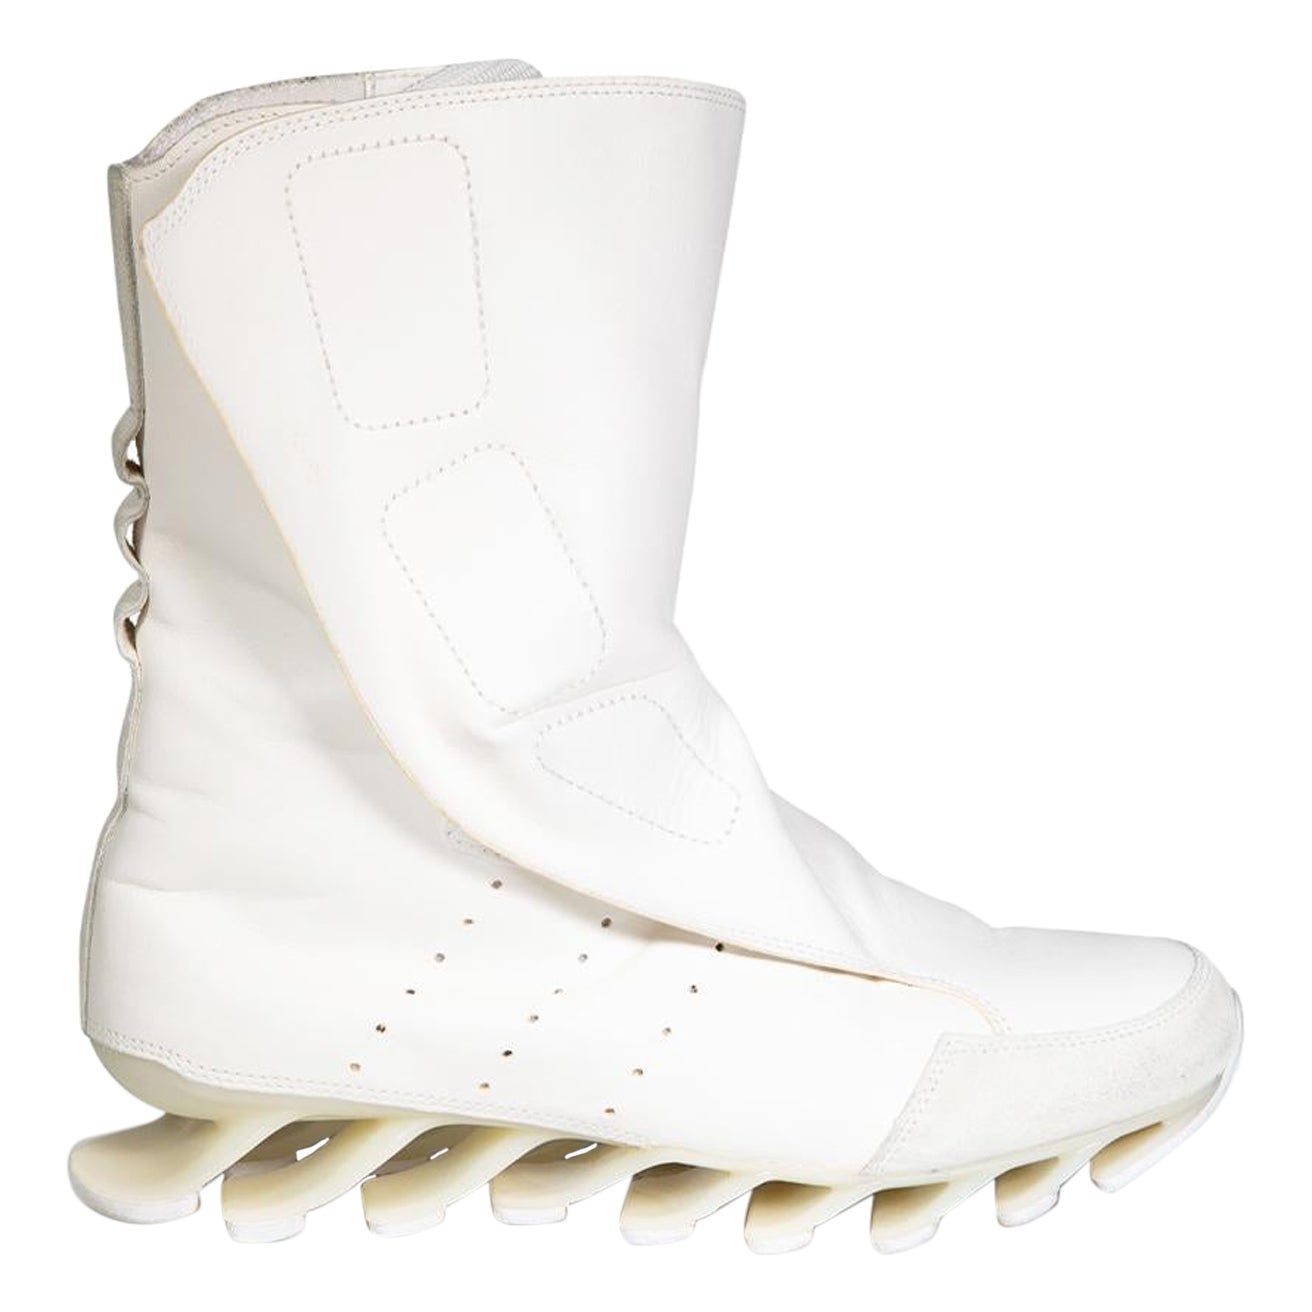 Rick Owens Adidas x Rick Owens White Leather Springblade Boots Size UK 6